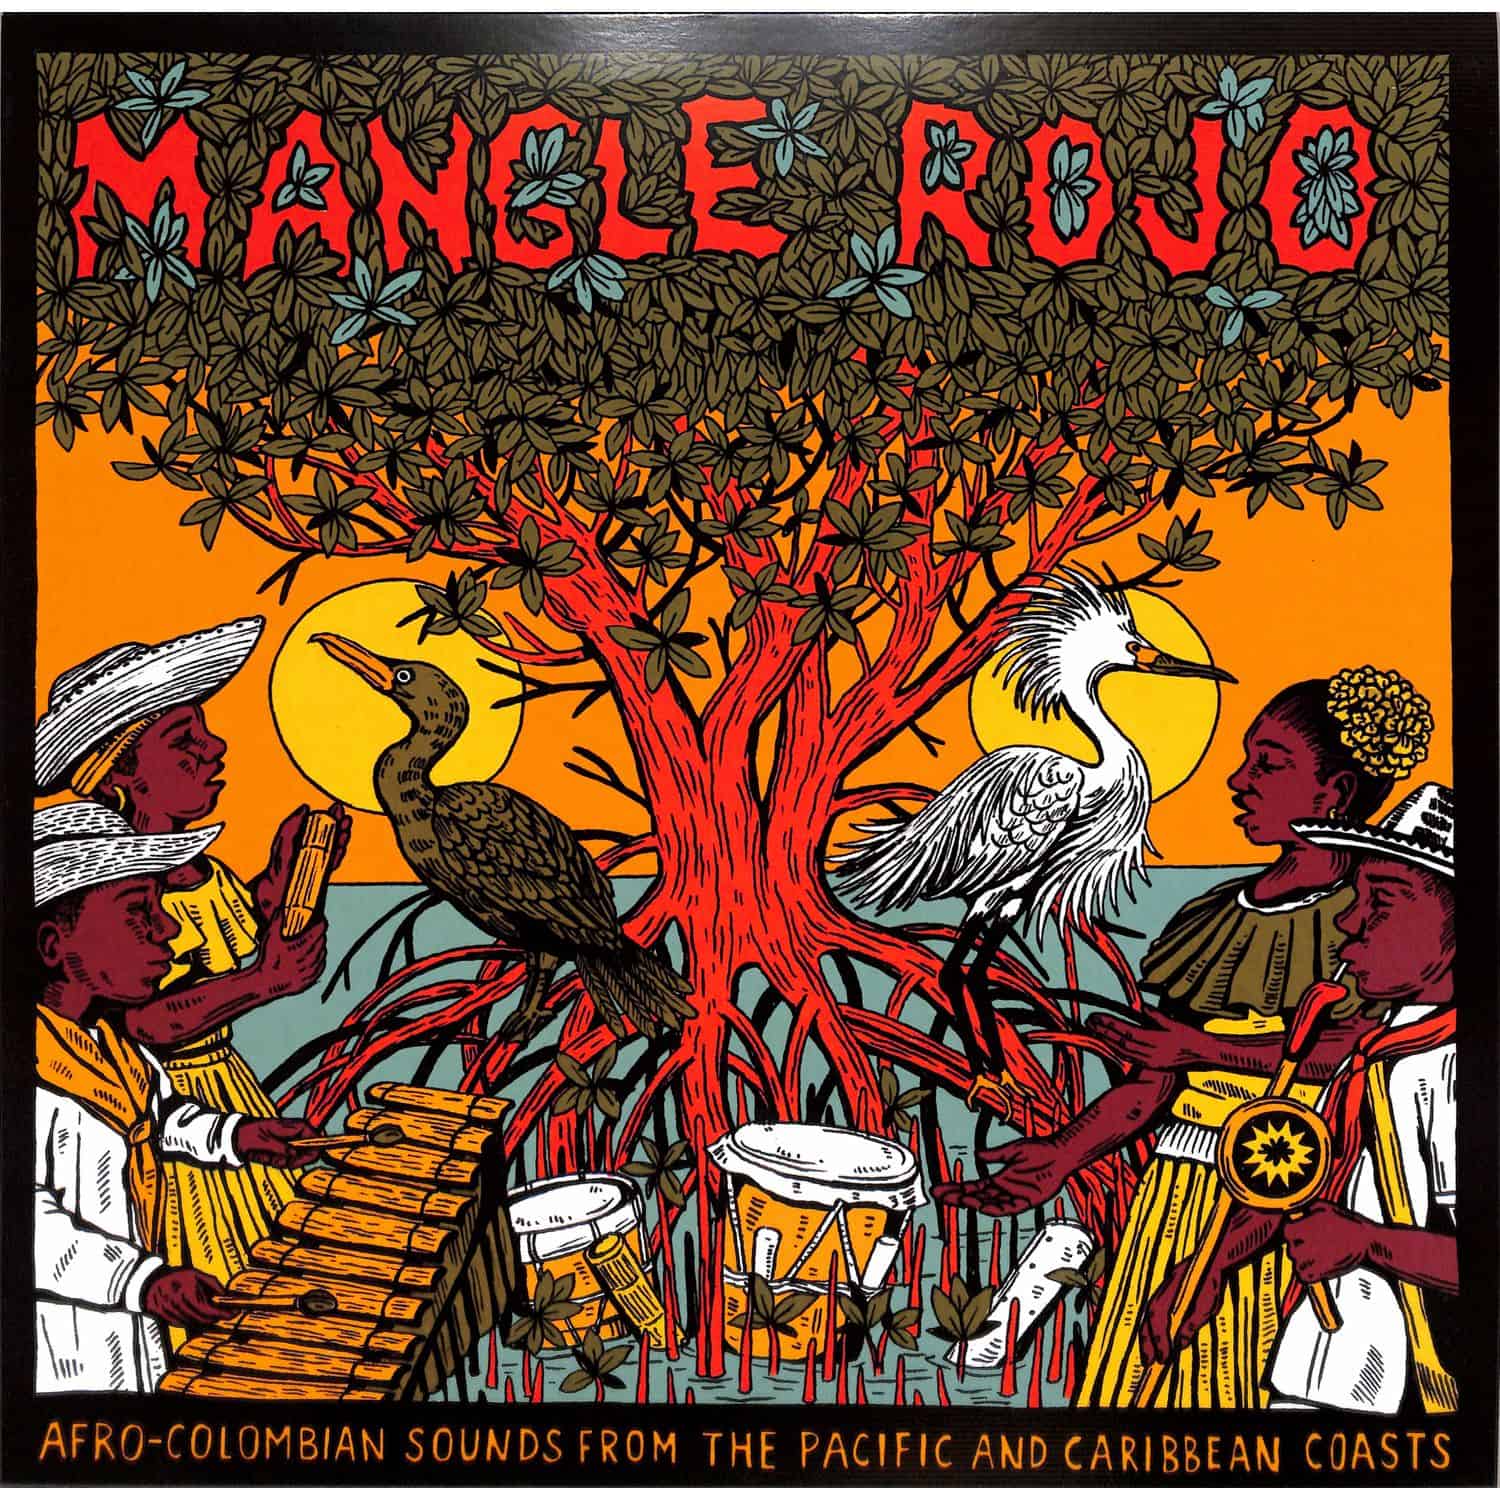 Los Alegres Del Telembi - MANGLE ROJO AFRO COLOMBIAN SOUNDS FROM THE PACIFIC AND CARIBBEAN COASTS 